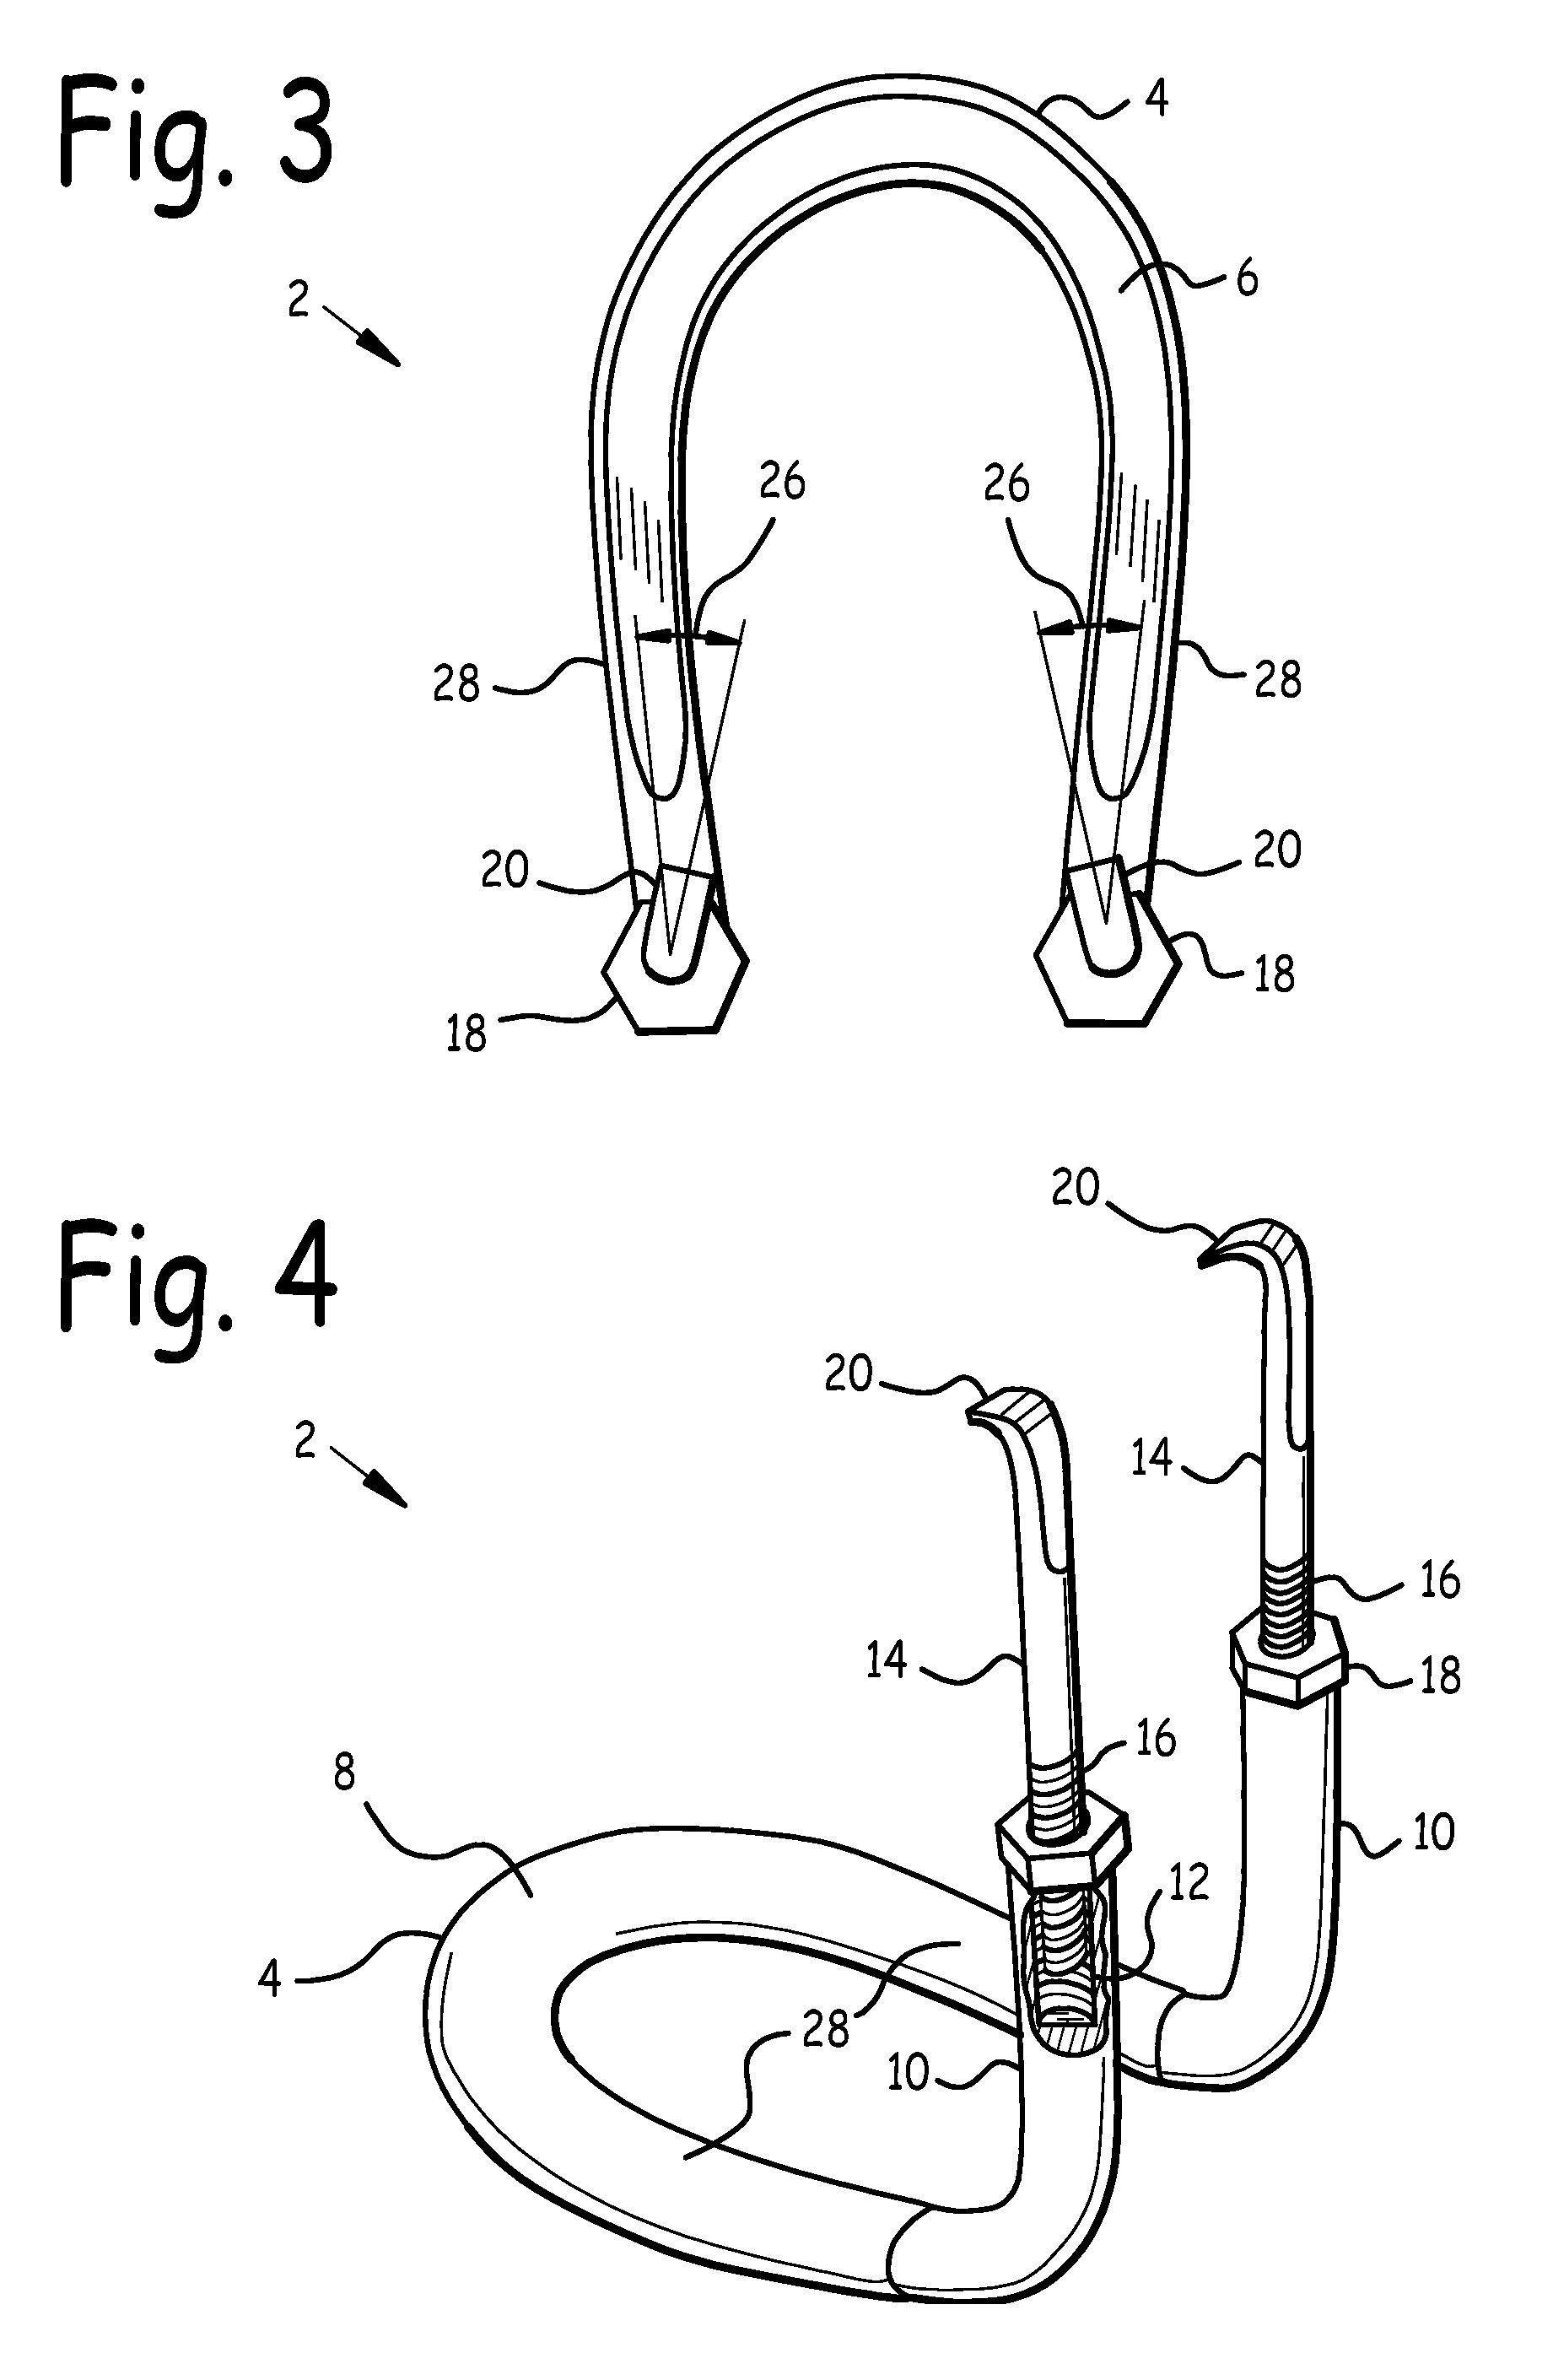 Upper denture release apparatus and method of use